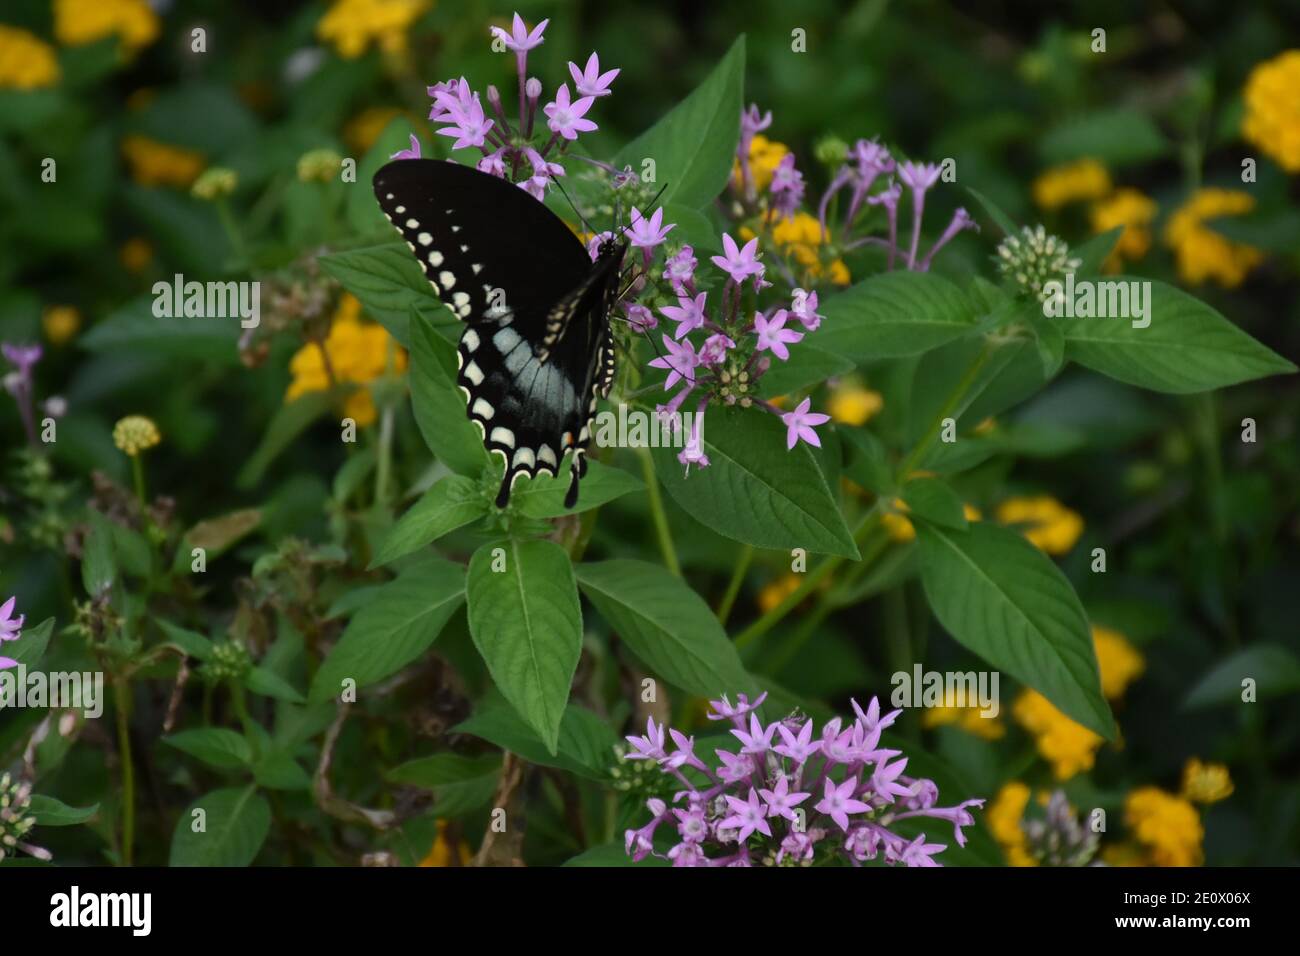 I created this macro-Picture of a Butterfly on a flower or Butterflies on a flower to practice my macro photography skills. Butterflies are important Stock Photo